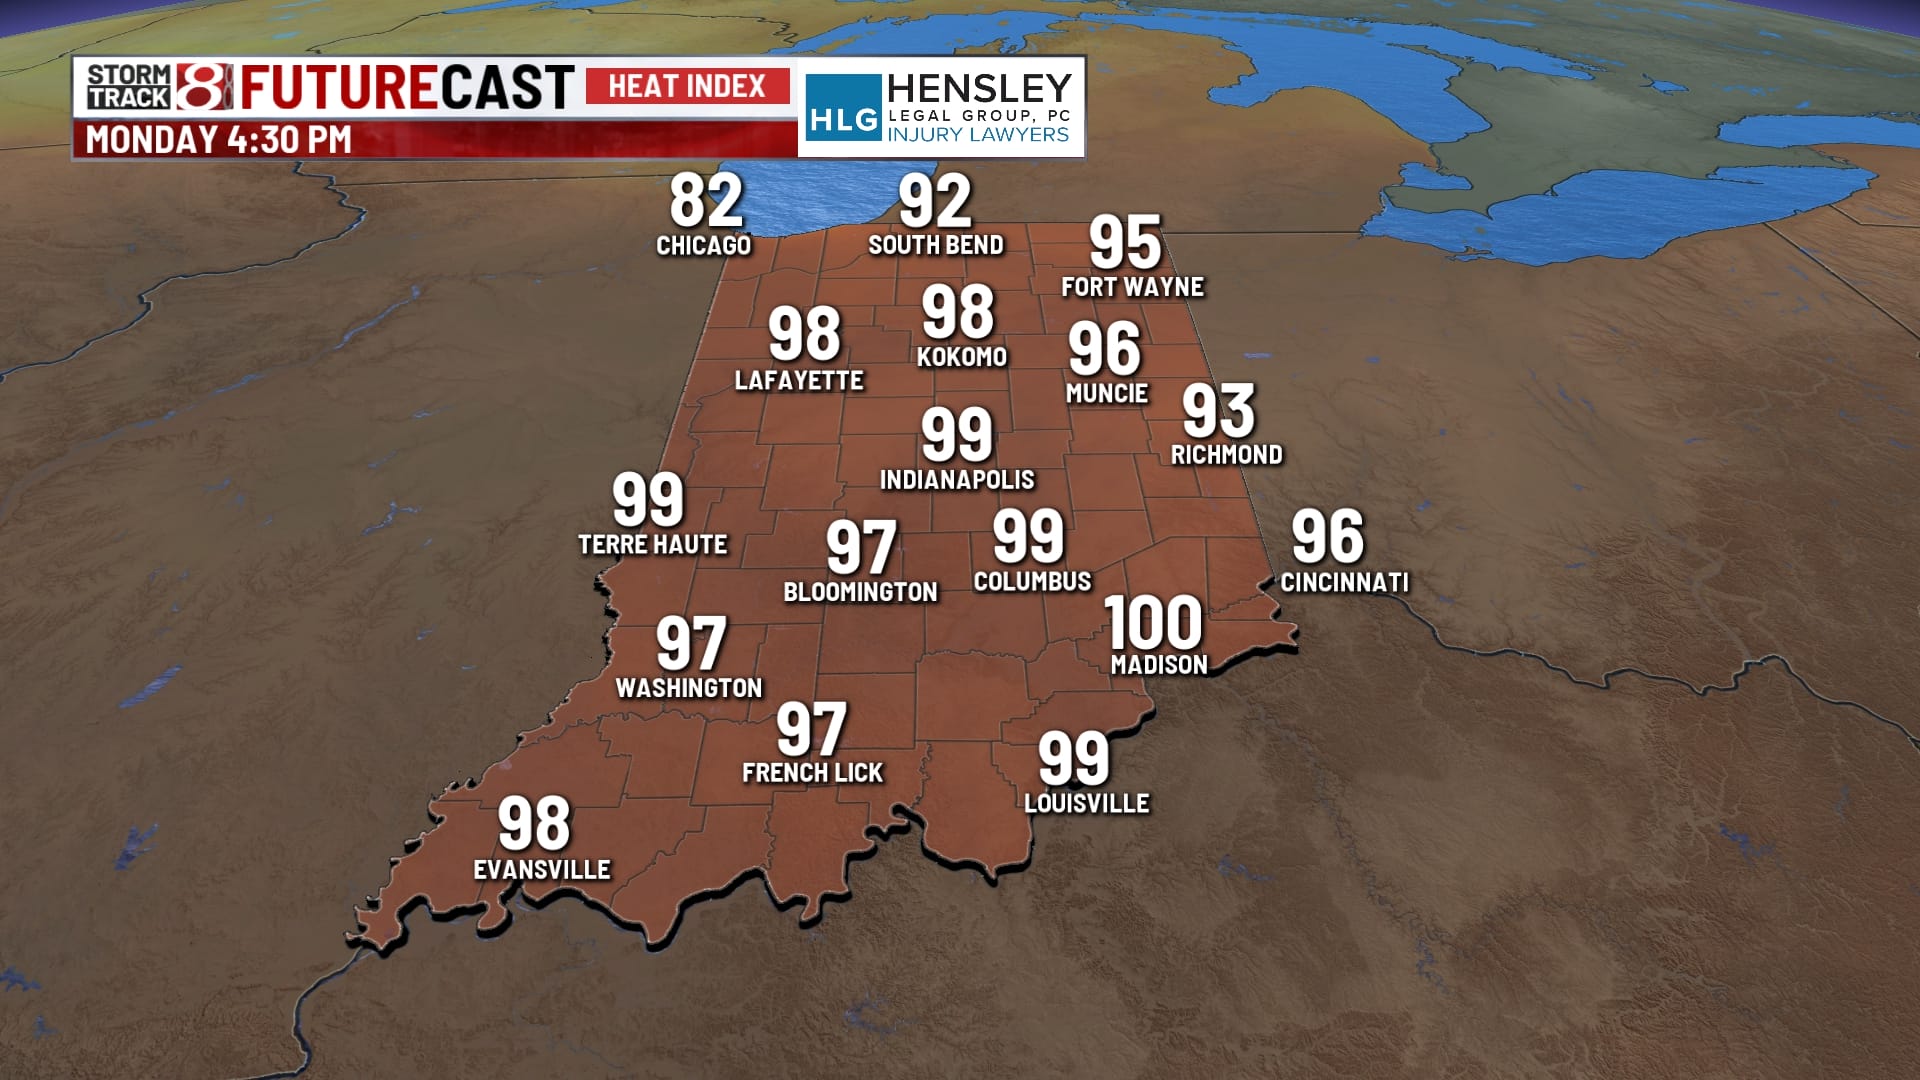 Heat index values peaking in the upper 90s Monday